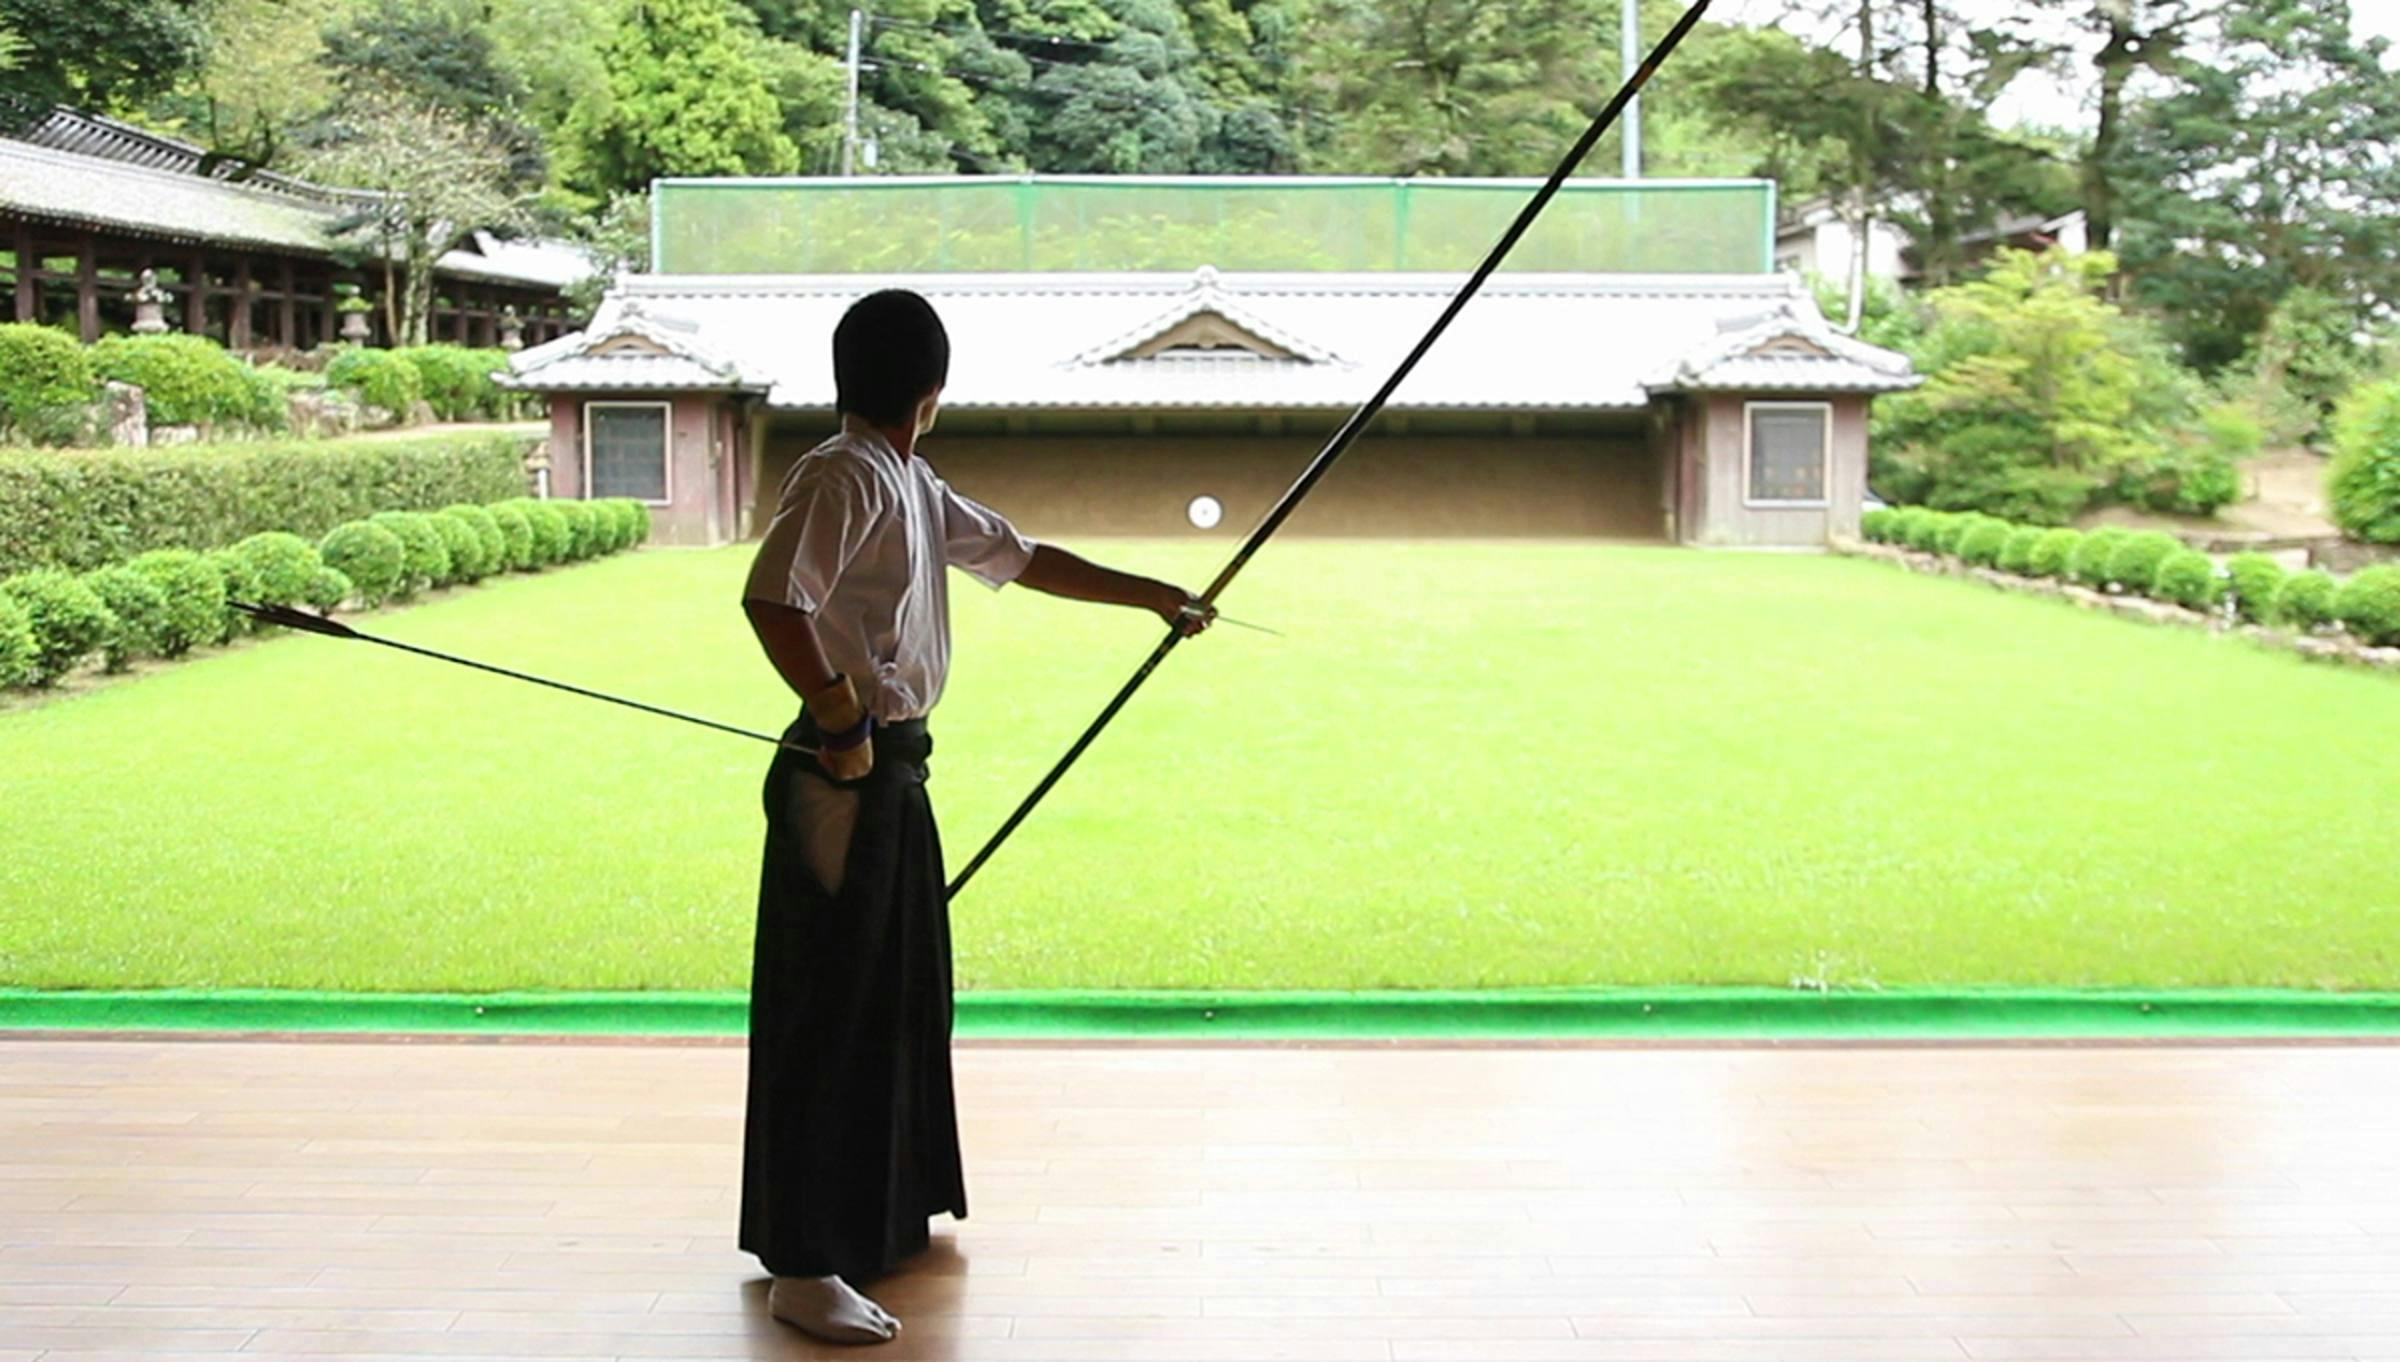 A person stands with their back to the camera holding a large bow in one hand and an arrow in the other. They stand in front of a grassy plane lined with formal bushes.